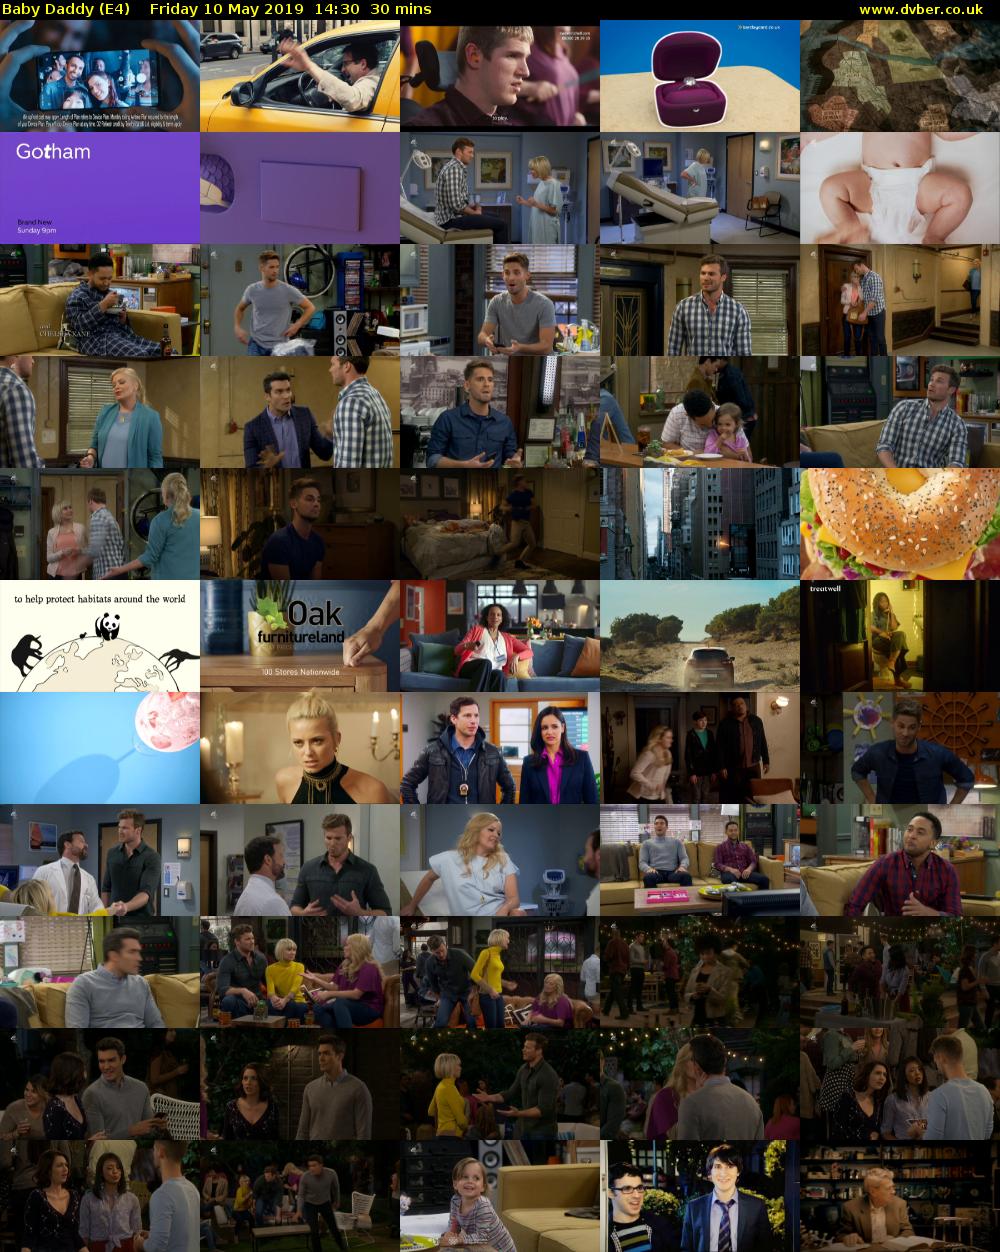 Baby Daddy (E4) Friday 10 May 2019 14:30 - 15:00